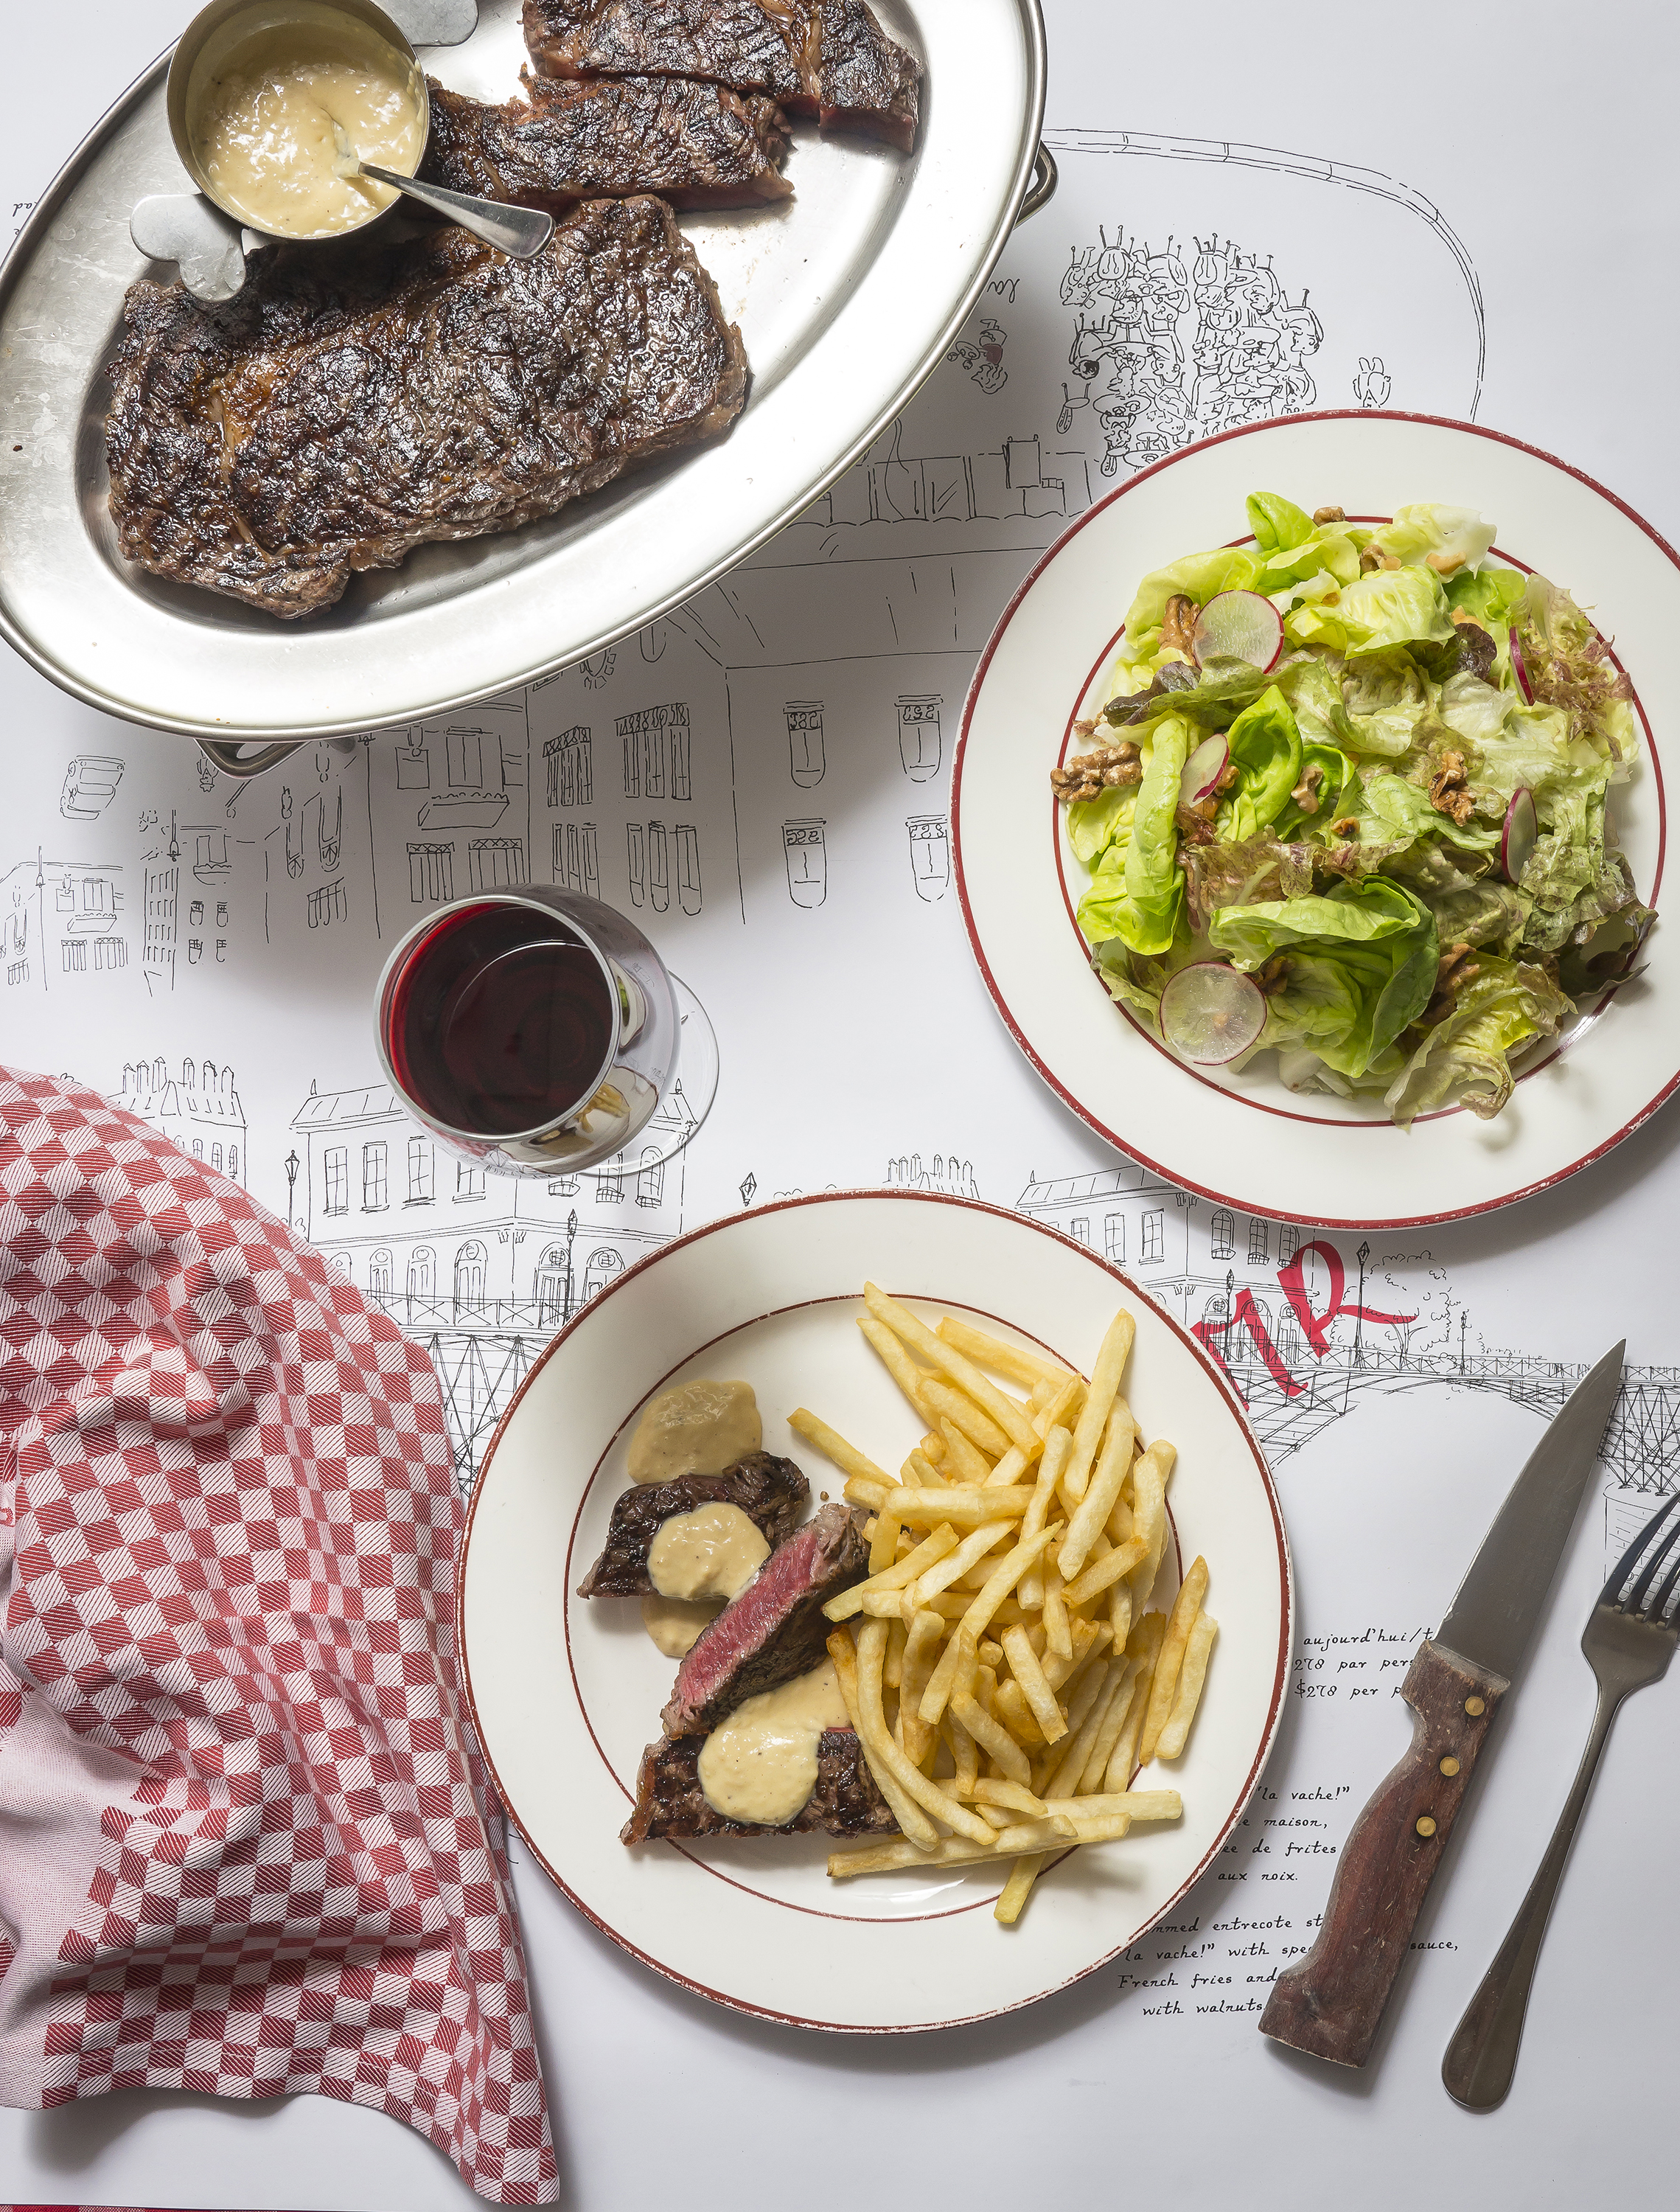 The signature ribeye steak with salad and fries